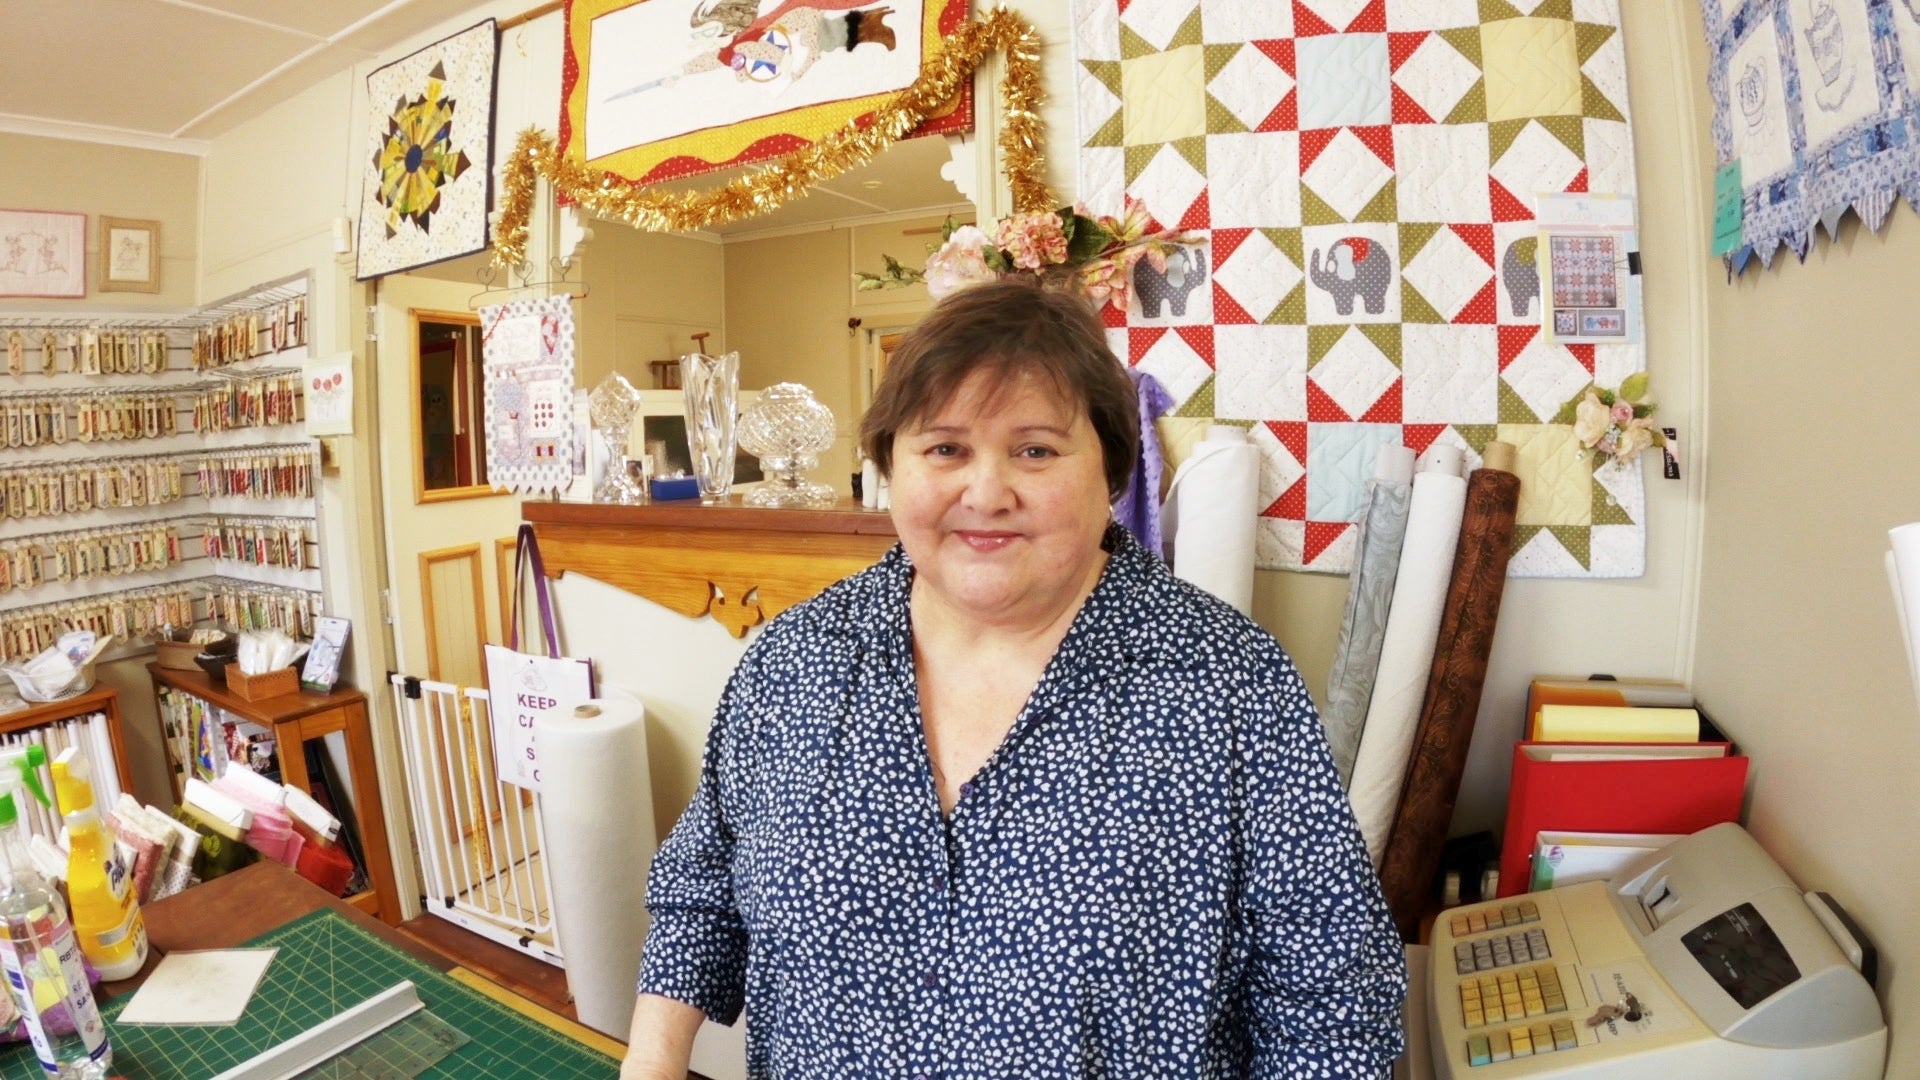 Classes at The Country Quilt Co